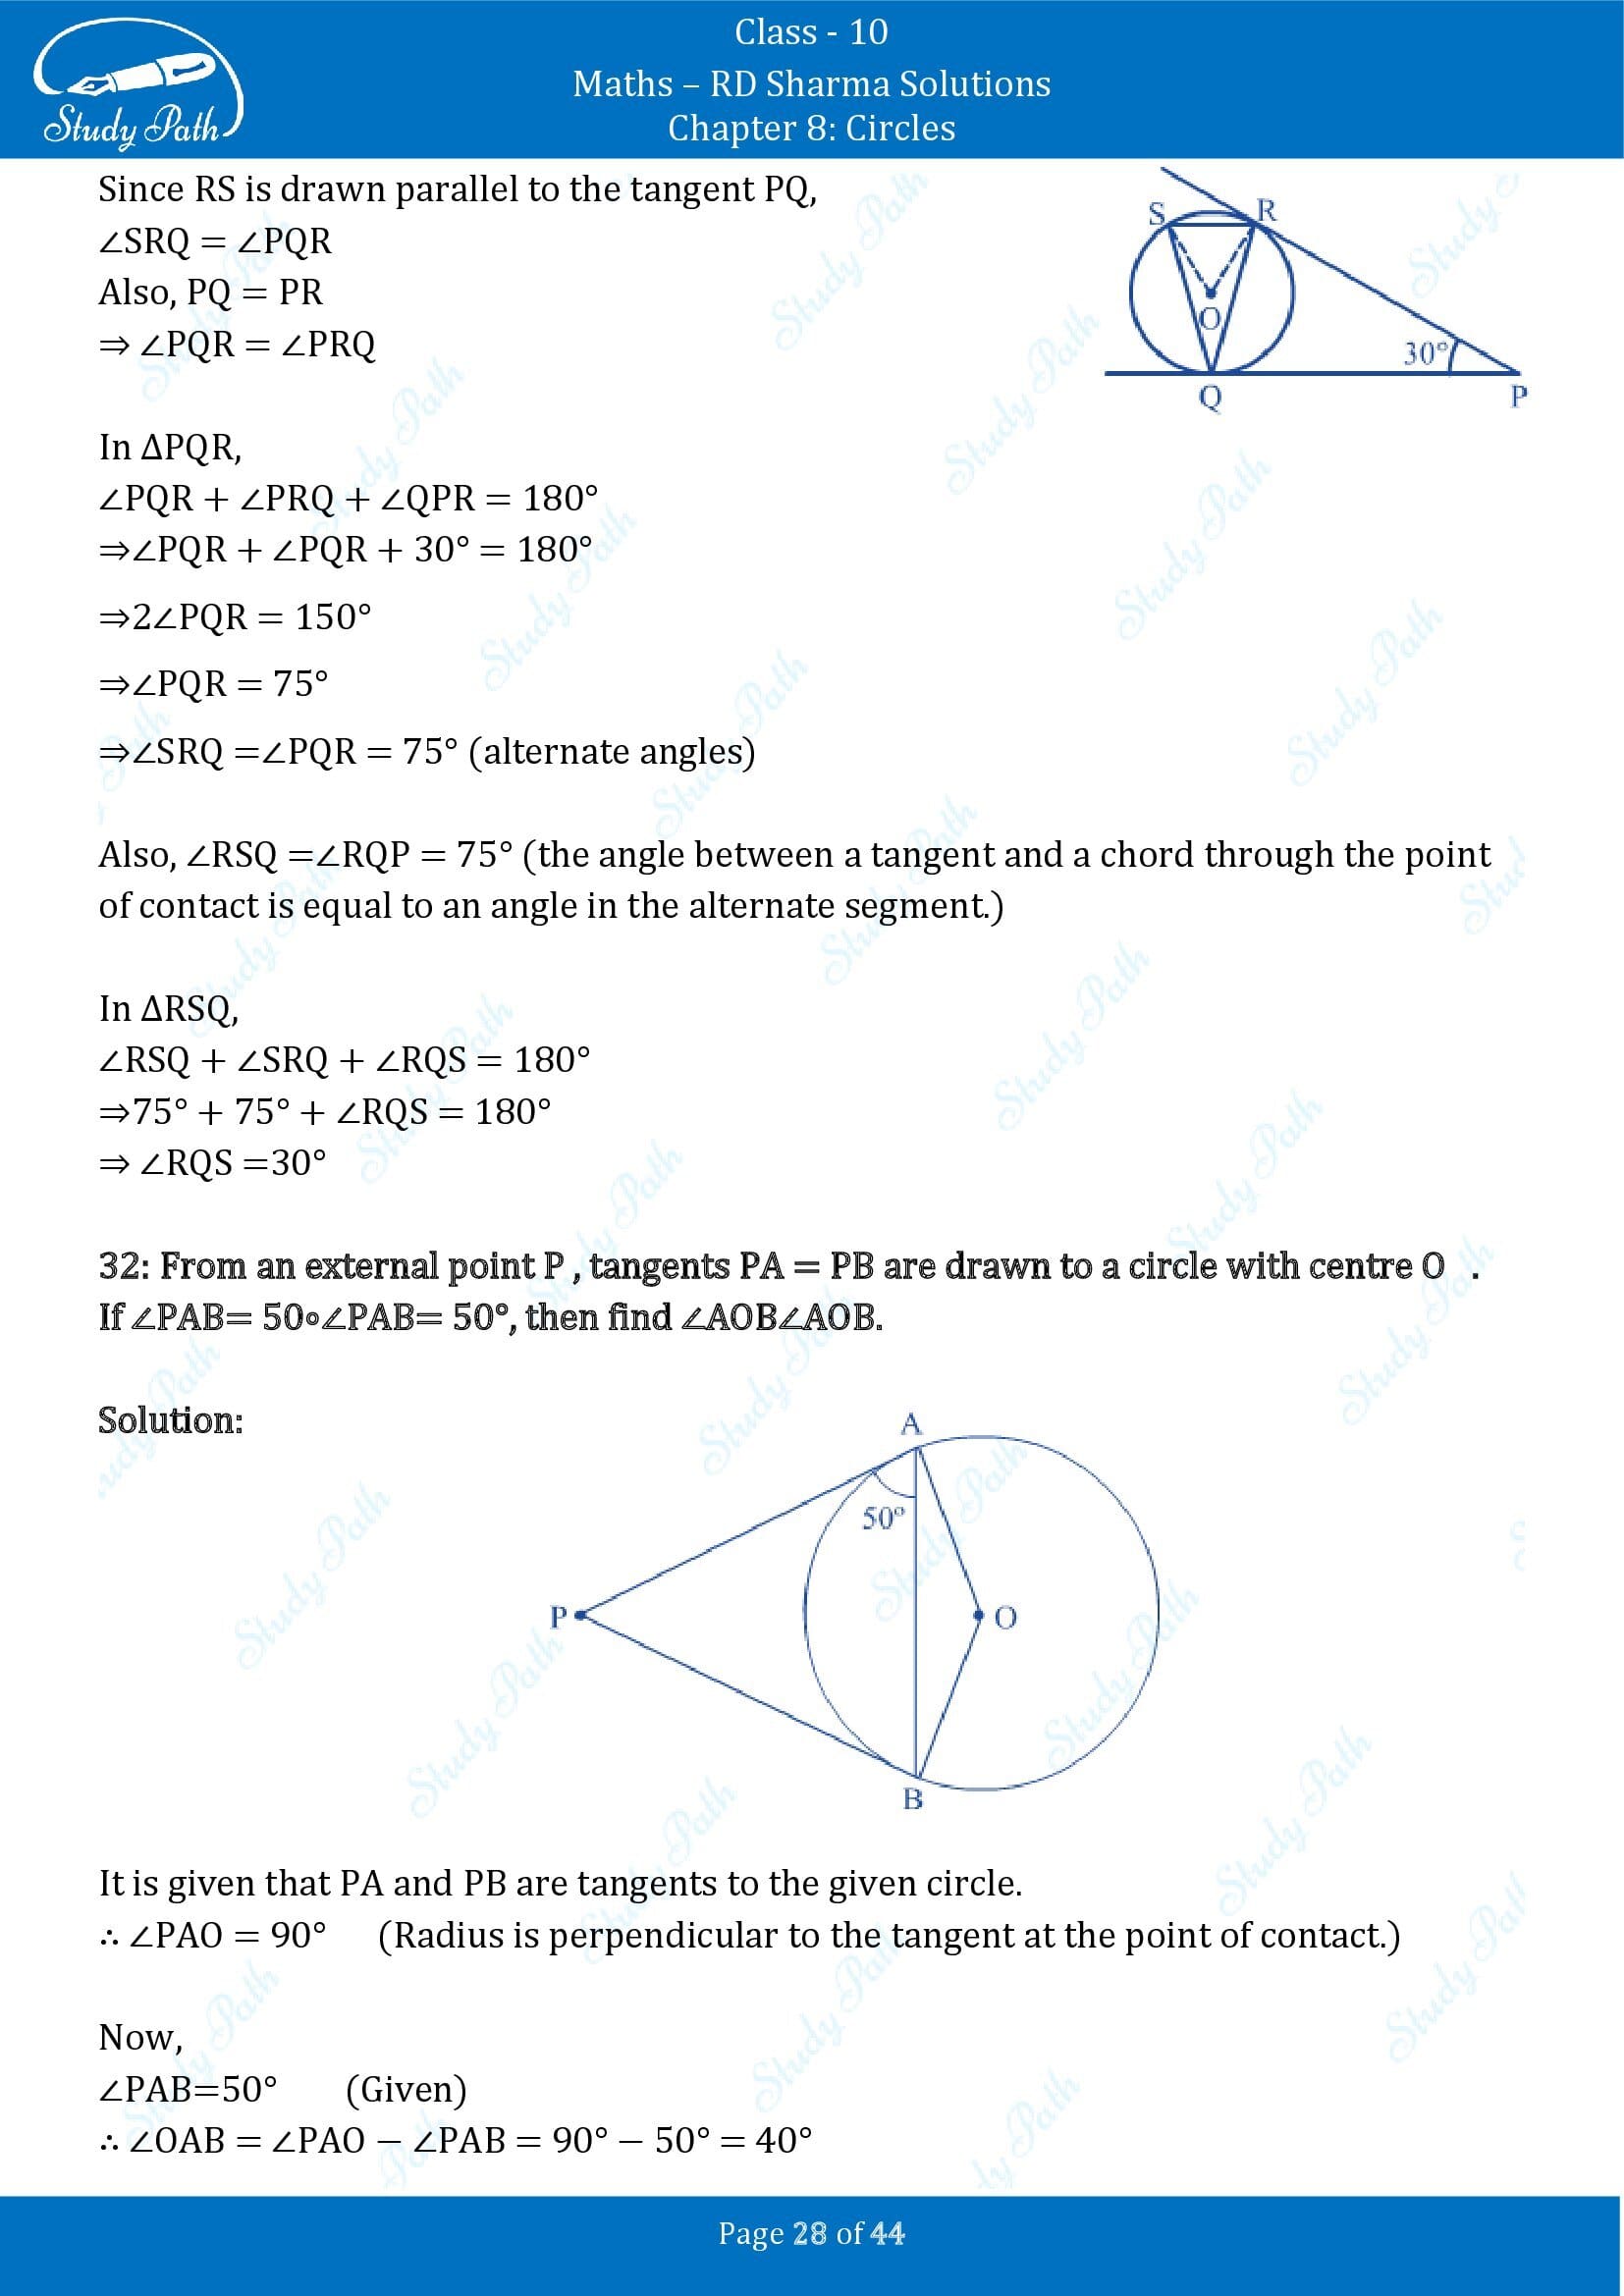 RD Sharma Solutions Class 10 Chapter 8 Circles Exercise 8.2 00028